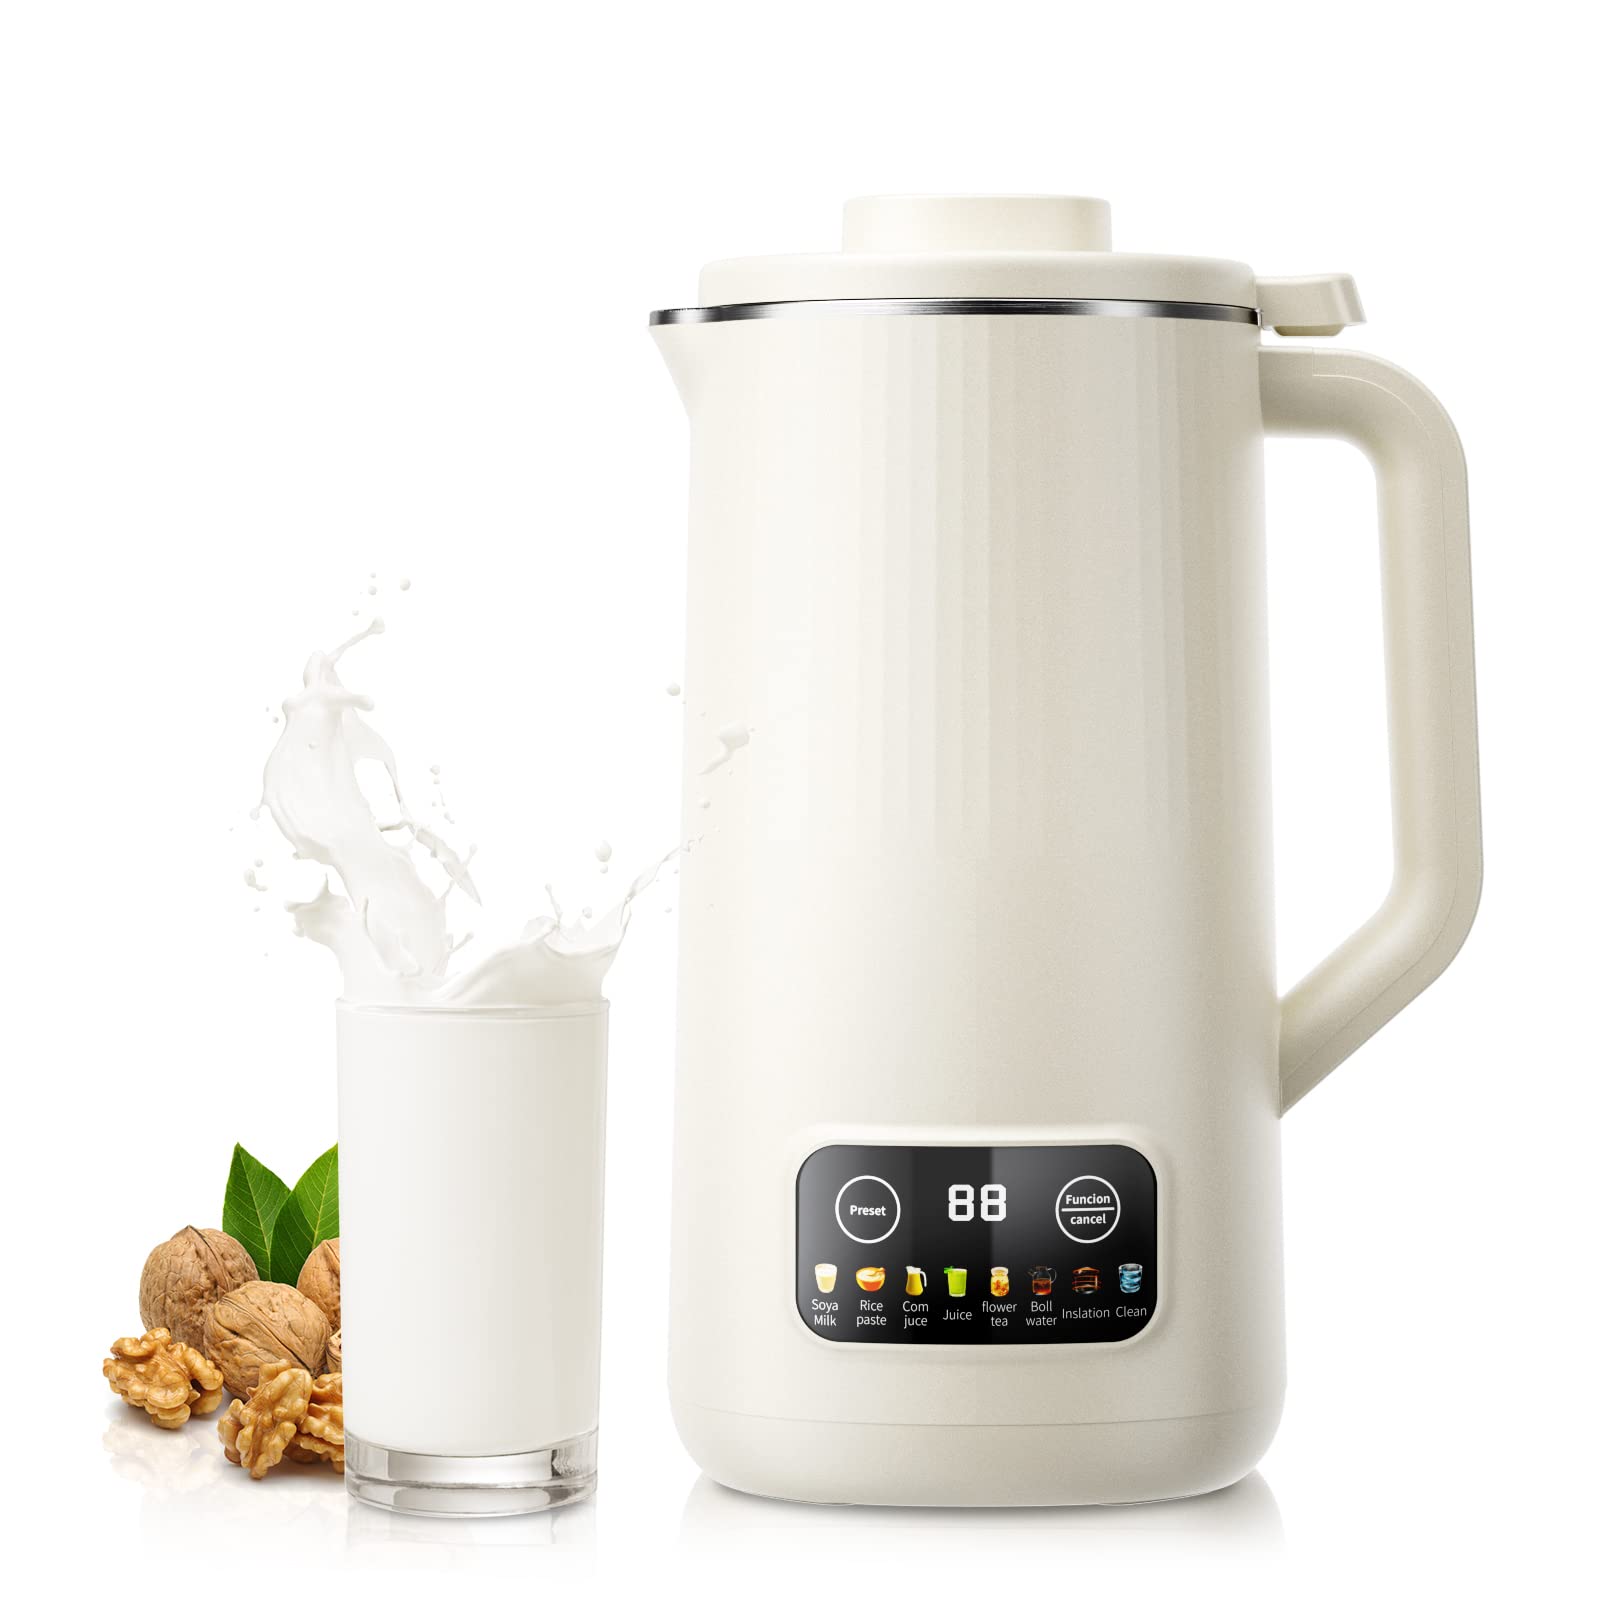 A white electric coffee maker with nuts and a glass of milk.